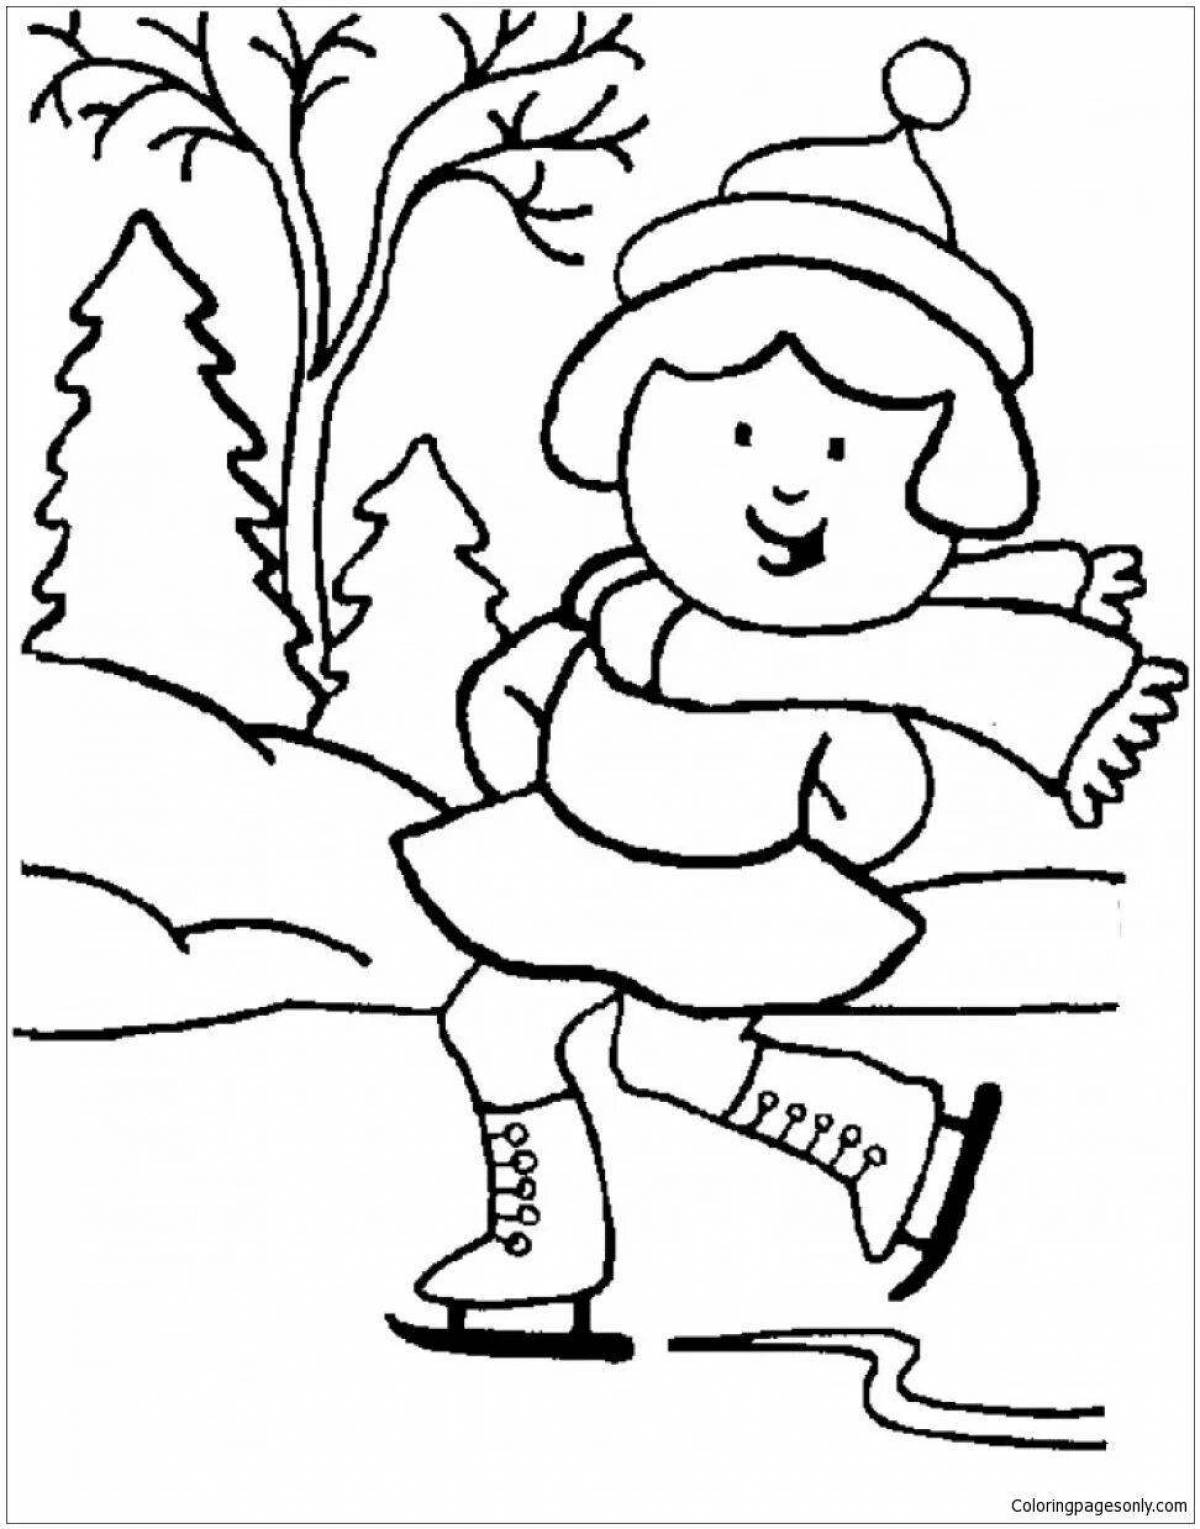 Wonderful winter coloring book for kids